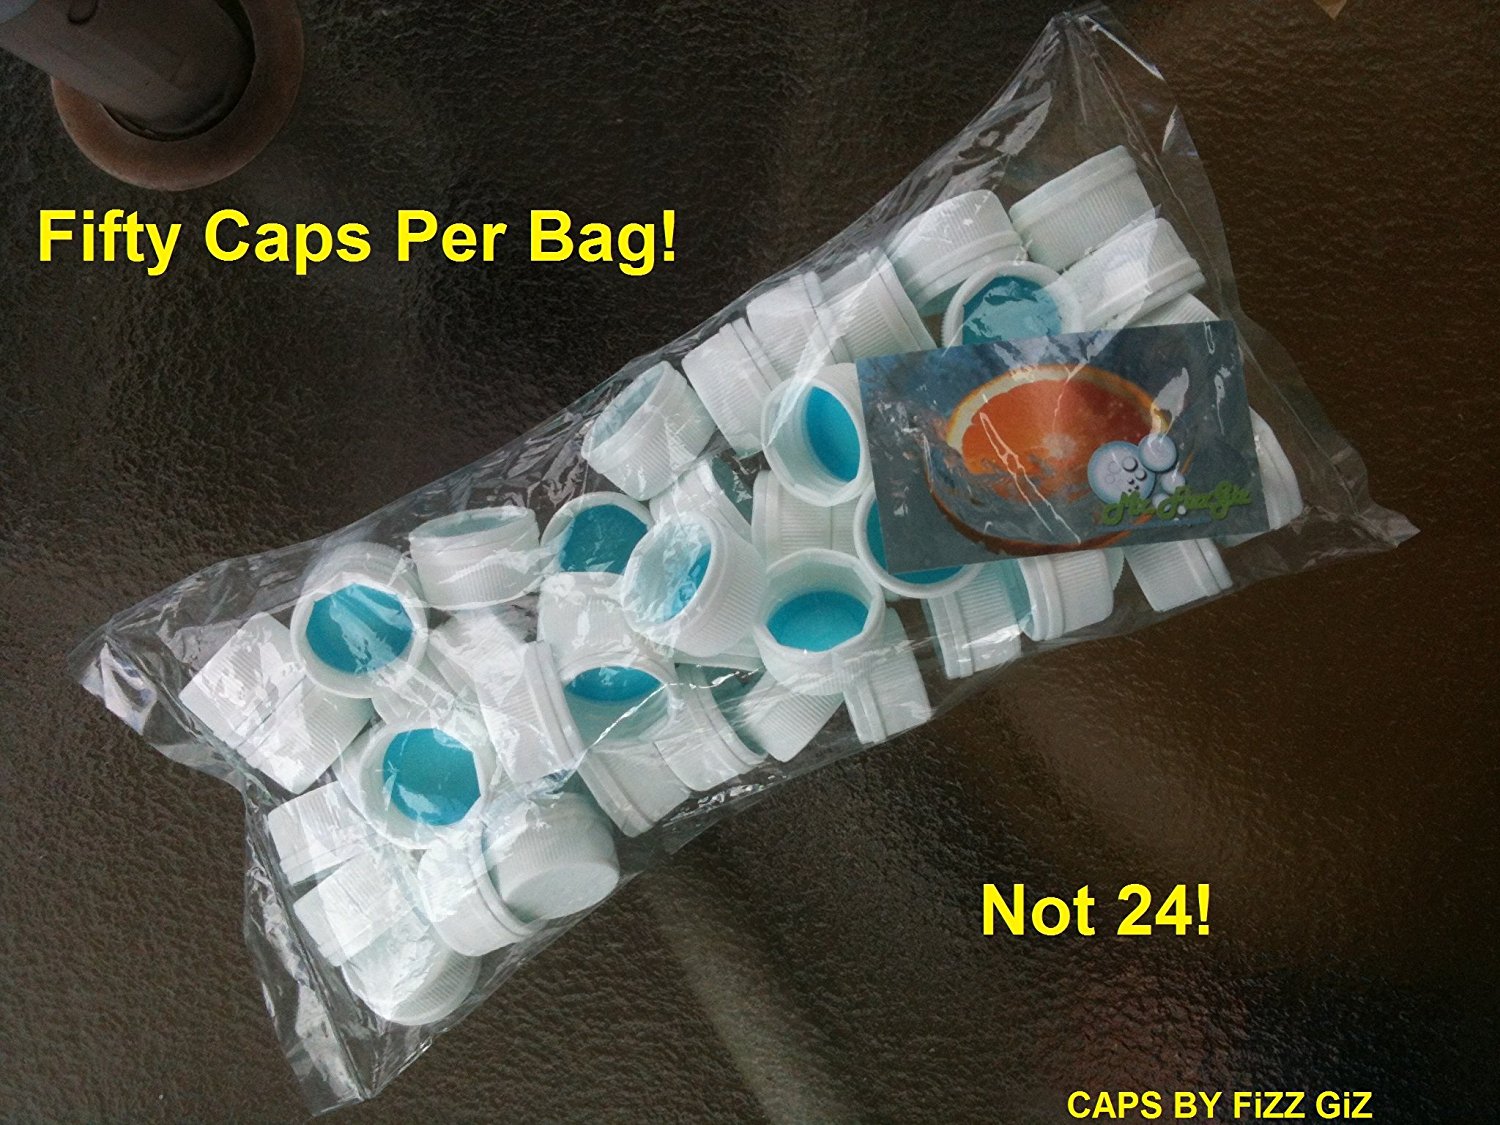 28mm Plastic Screw Caps for PET Bottle, bag of 50 Sneaky Alcohol Caps Reseal Your Bottles Perfectly